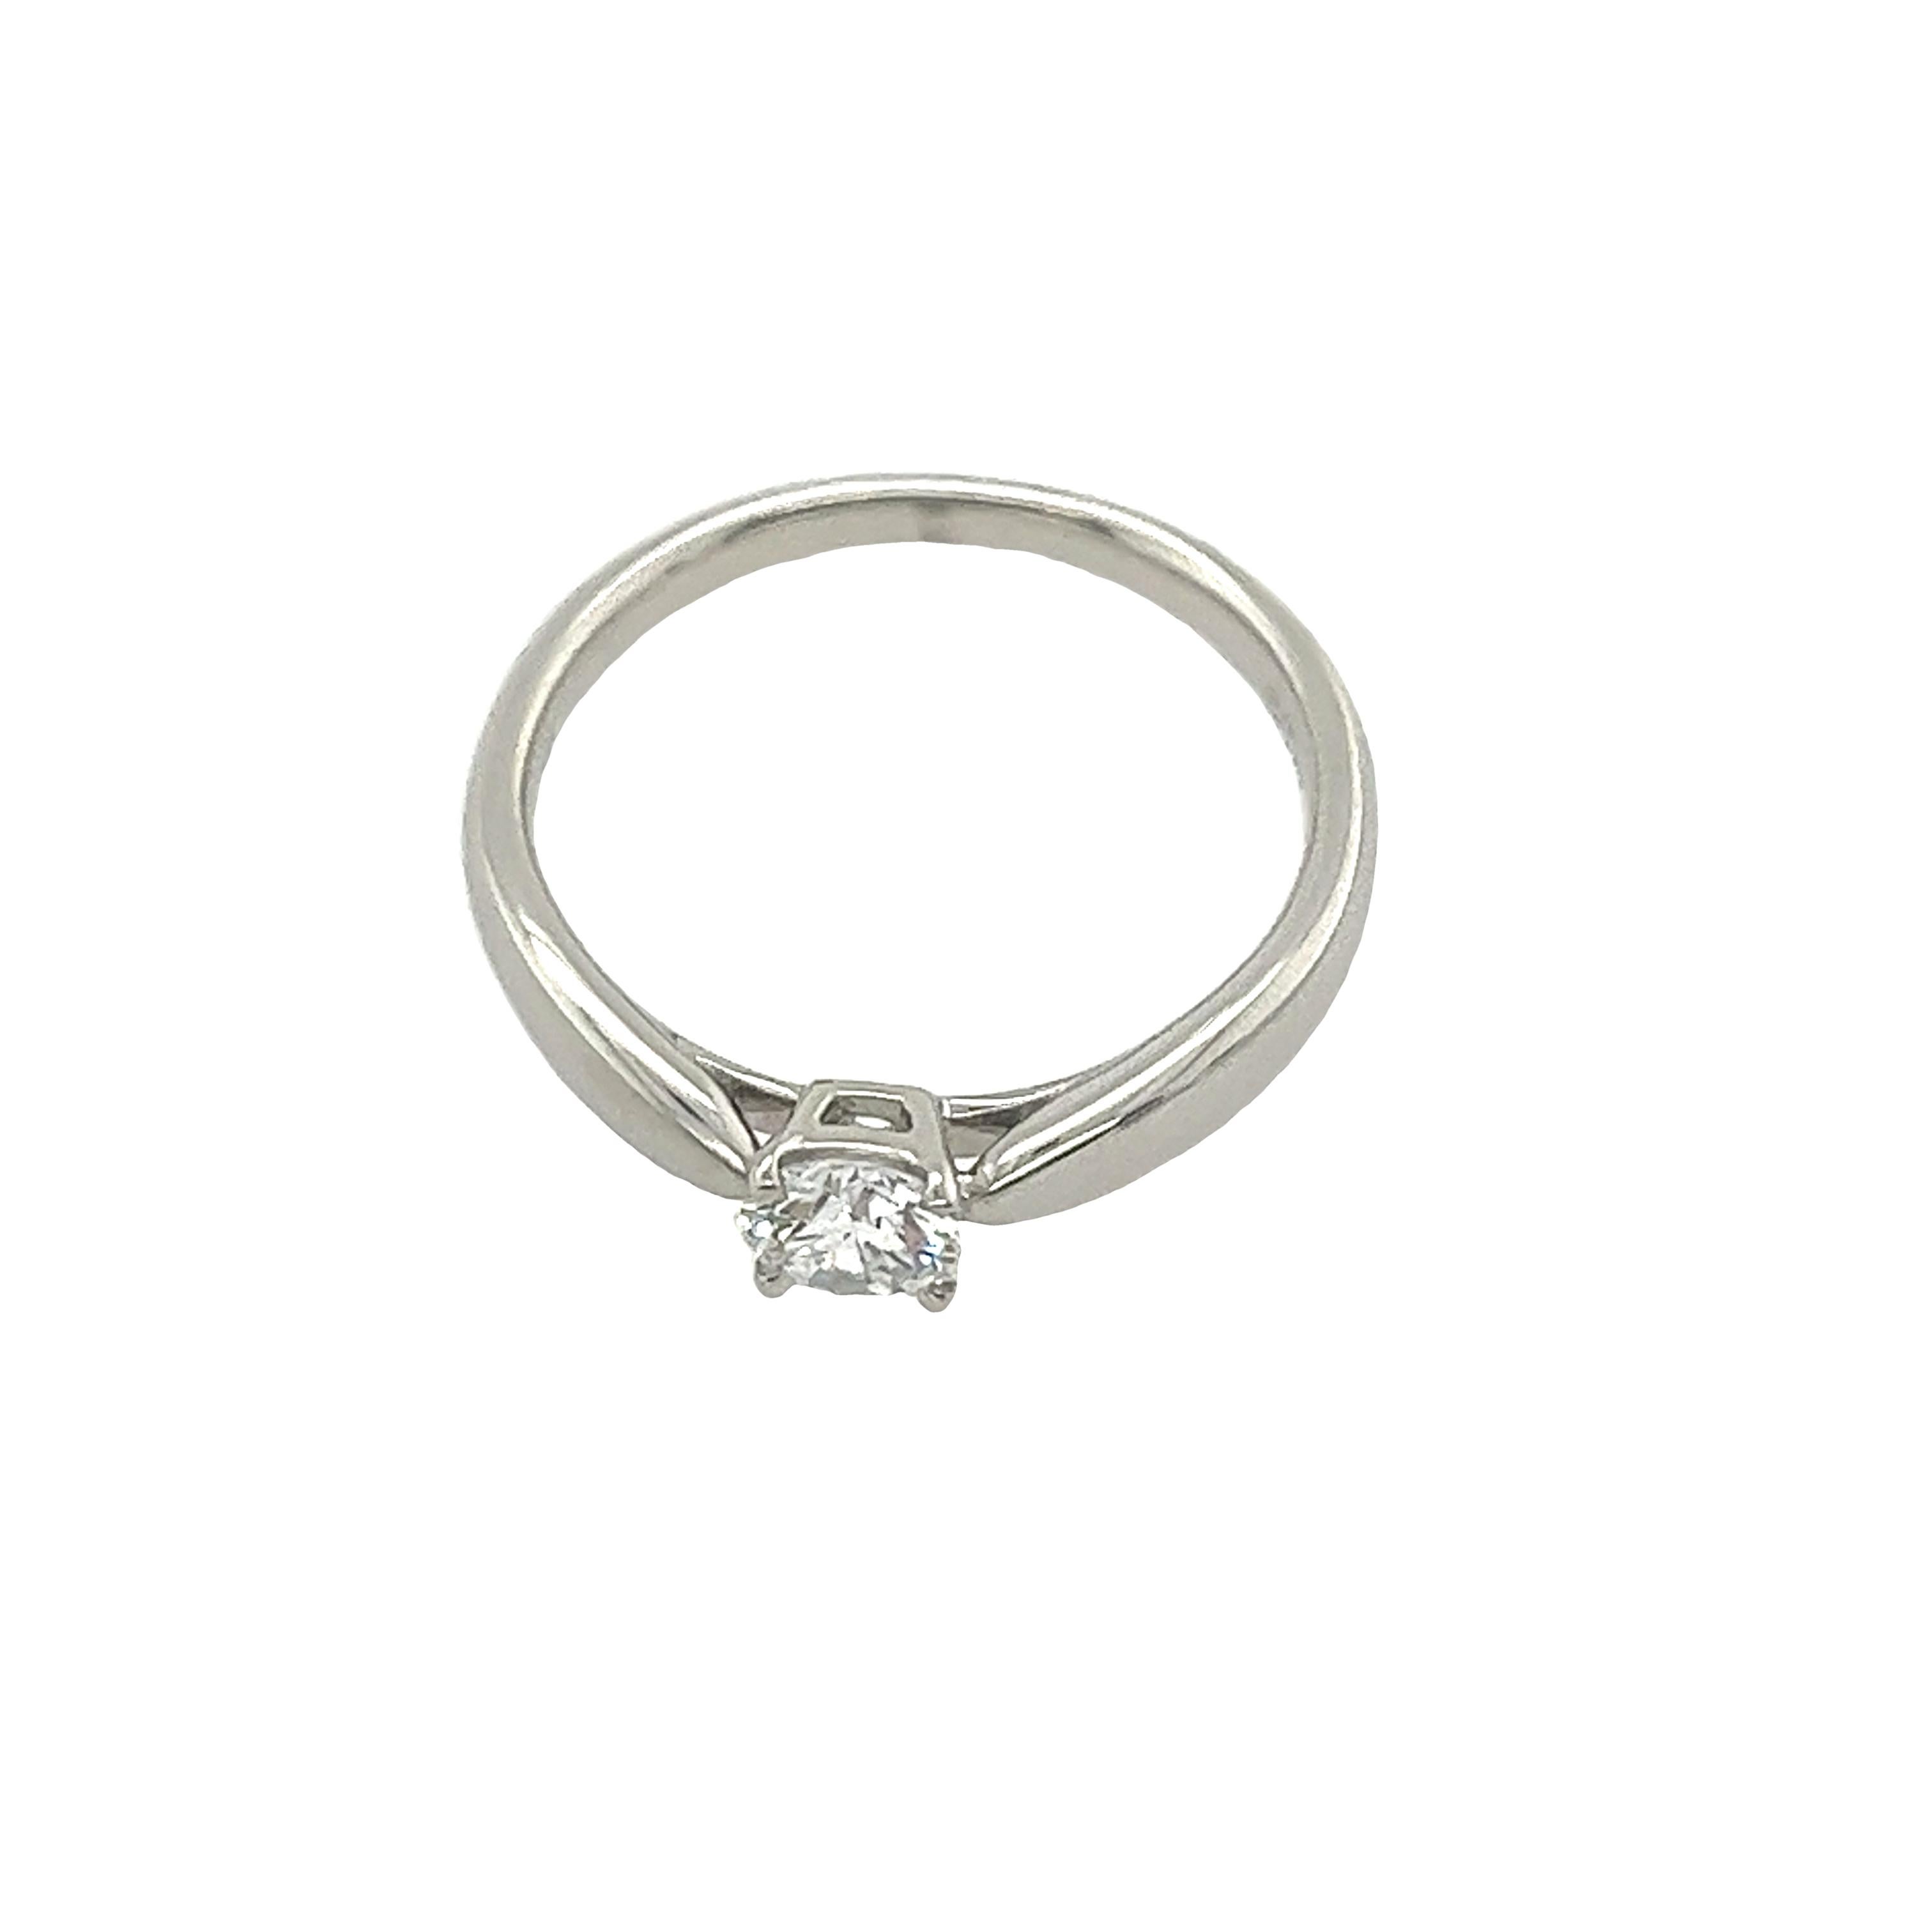 Exemplifying timeless elegance, the Tiffany & Co. Setting 0.29ct Diamond Solitaire Engagement Ring boasts a captivating E/VS1 diamond. With its classic design and impeccable clarity, it serves as a radiant symbol of everlasting love and